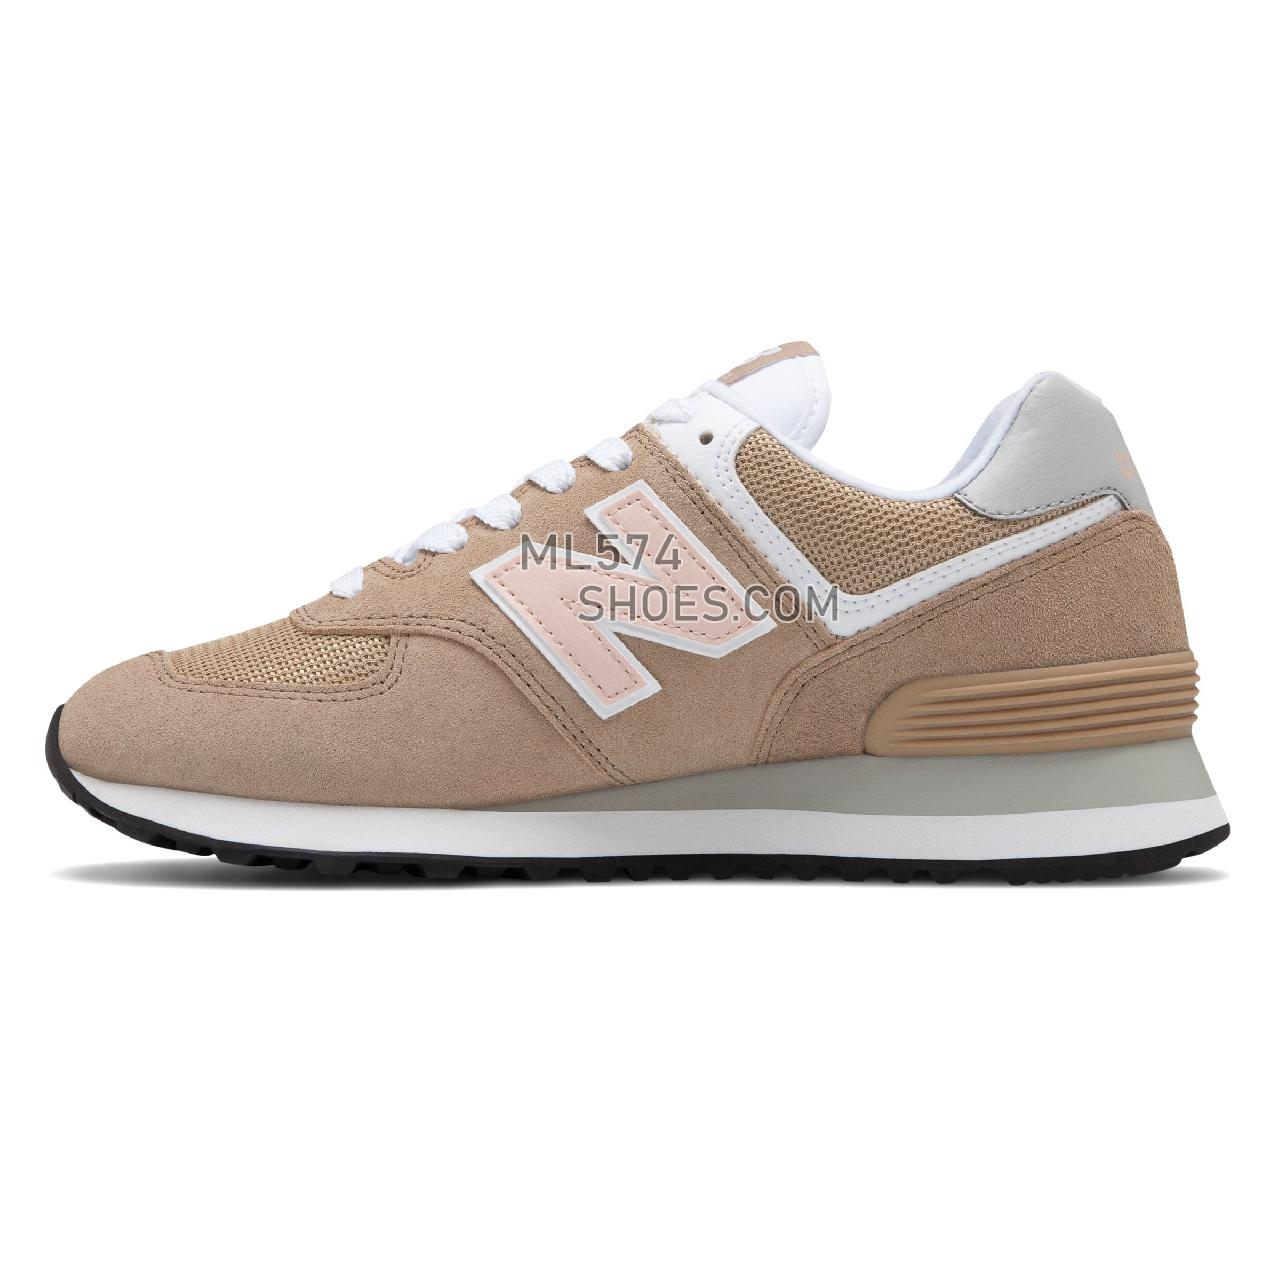 New Balance 574 - Women's Classic Sneakers - Hemp with Oyster Pink - WL574BTB